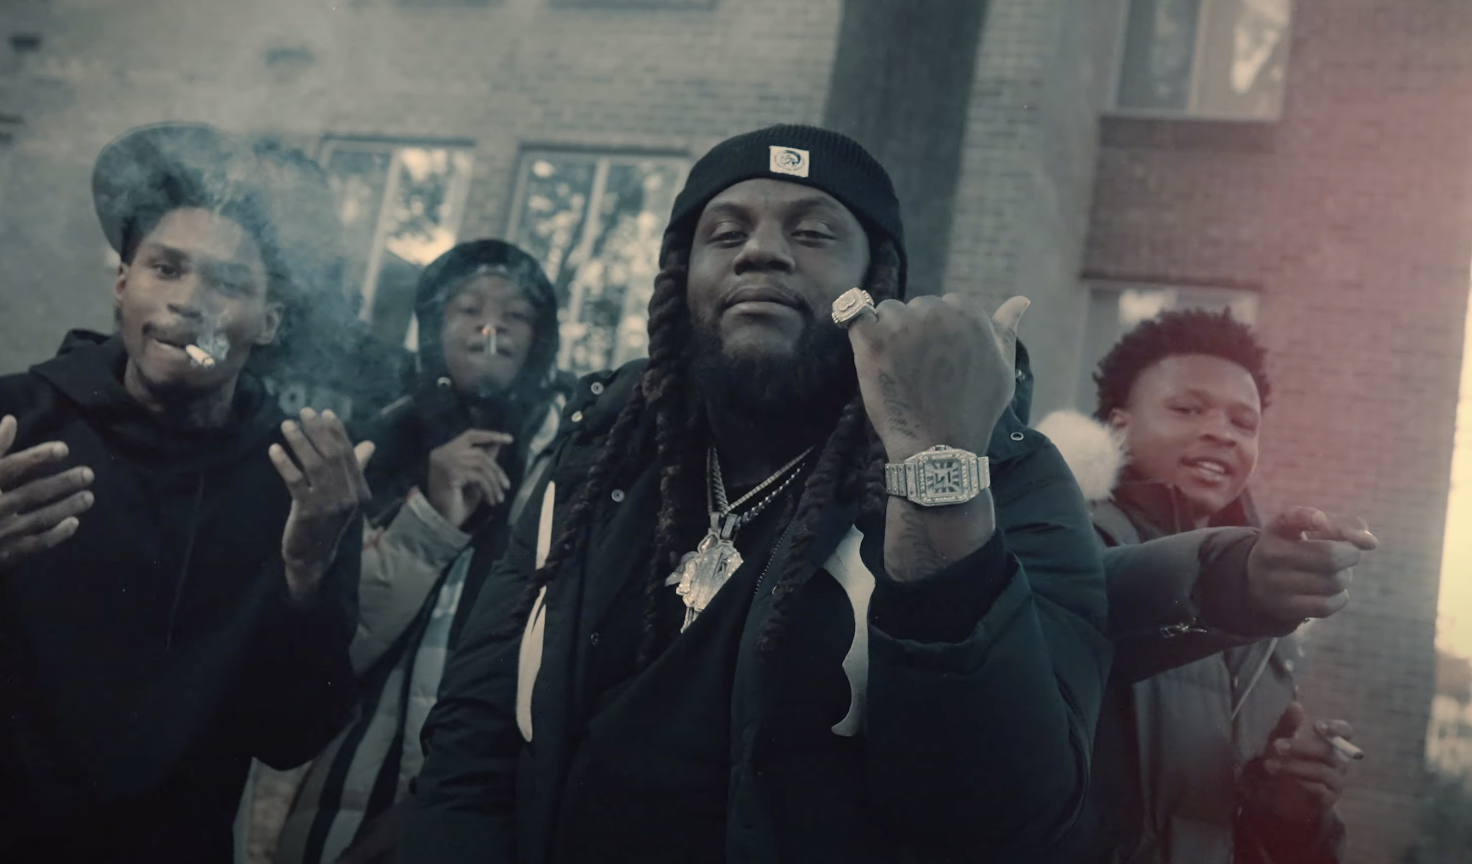 Fat Trel Feat. Ys2s Quisy & Two3Ace – “Str8 2 Business” (Video)